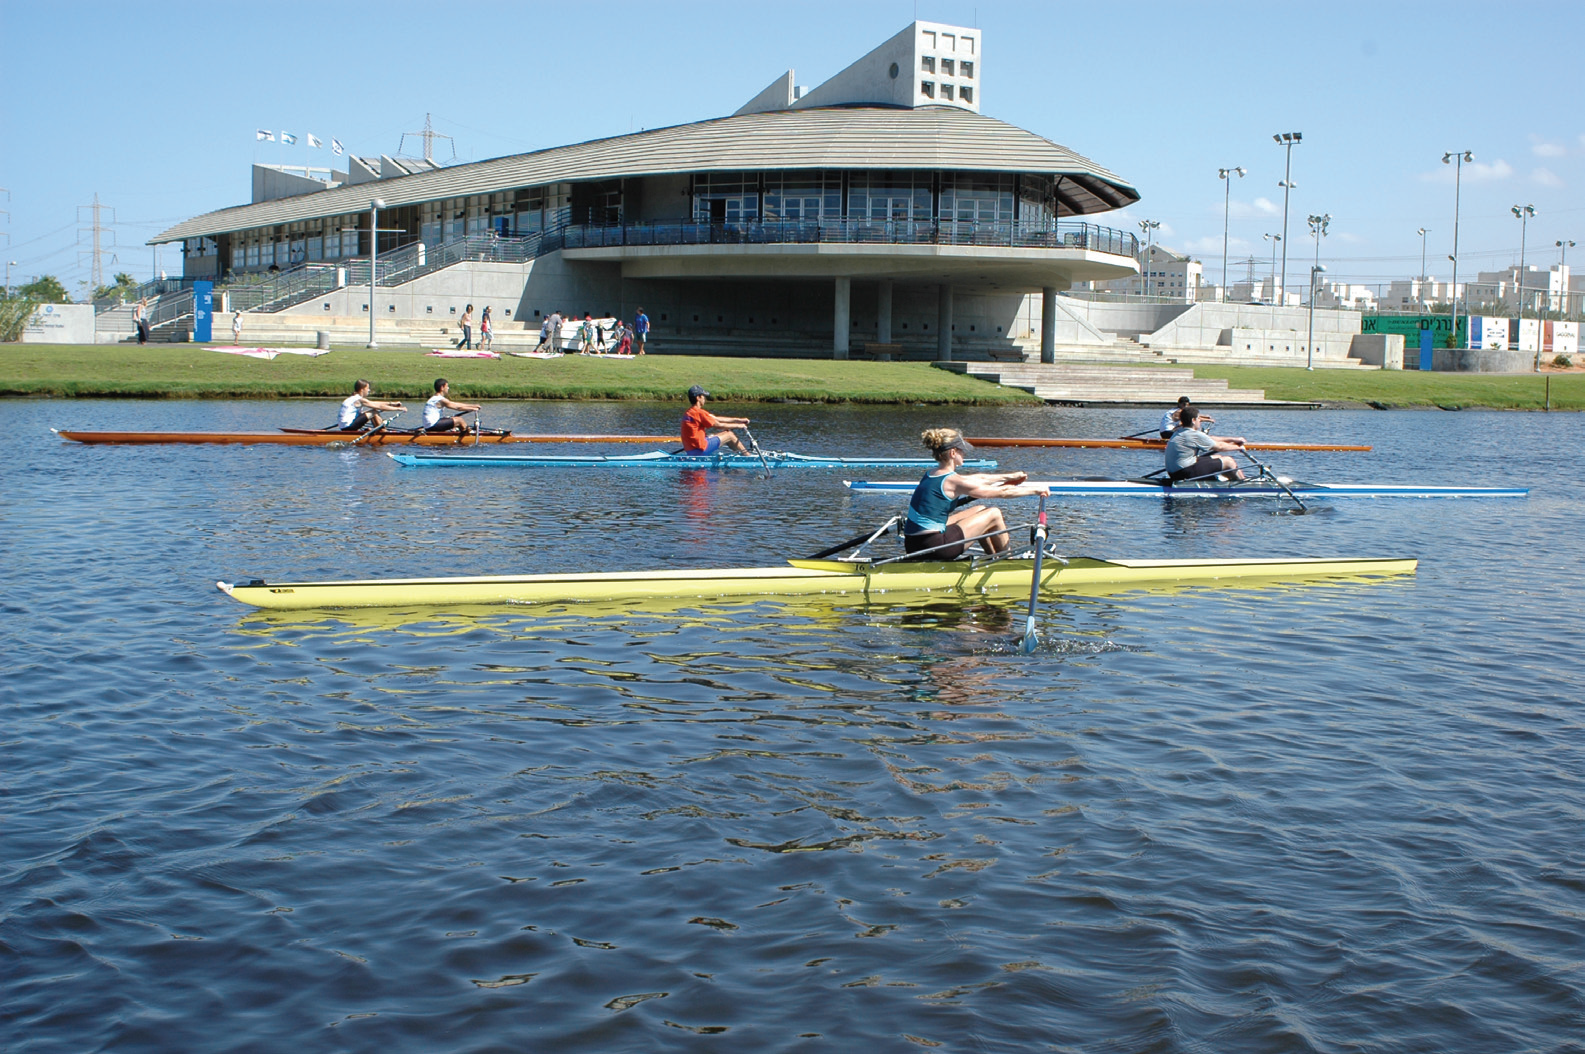 The Daniel Amichai Centre for Rowing and Nautical Studies